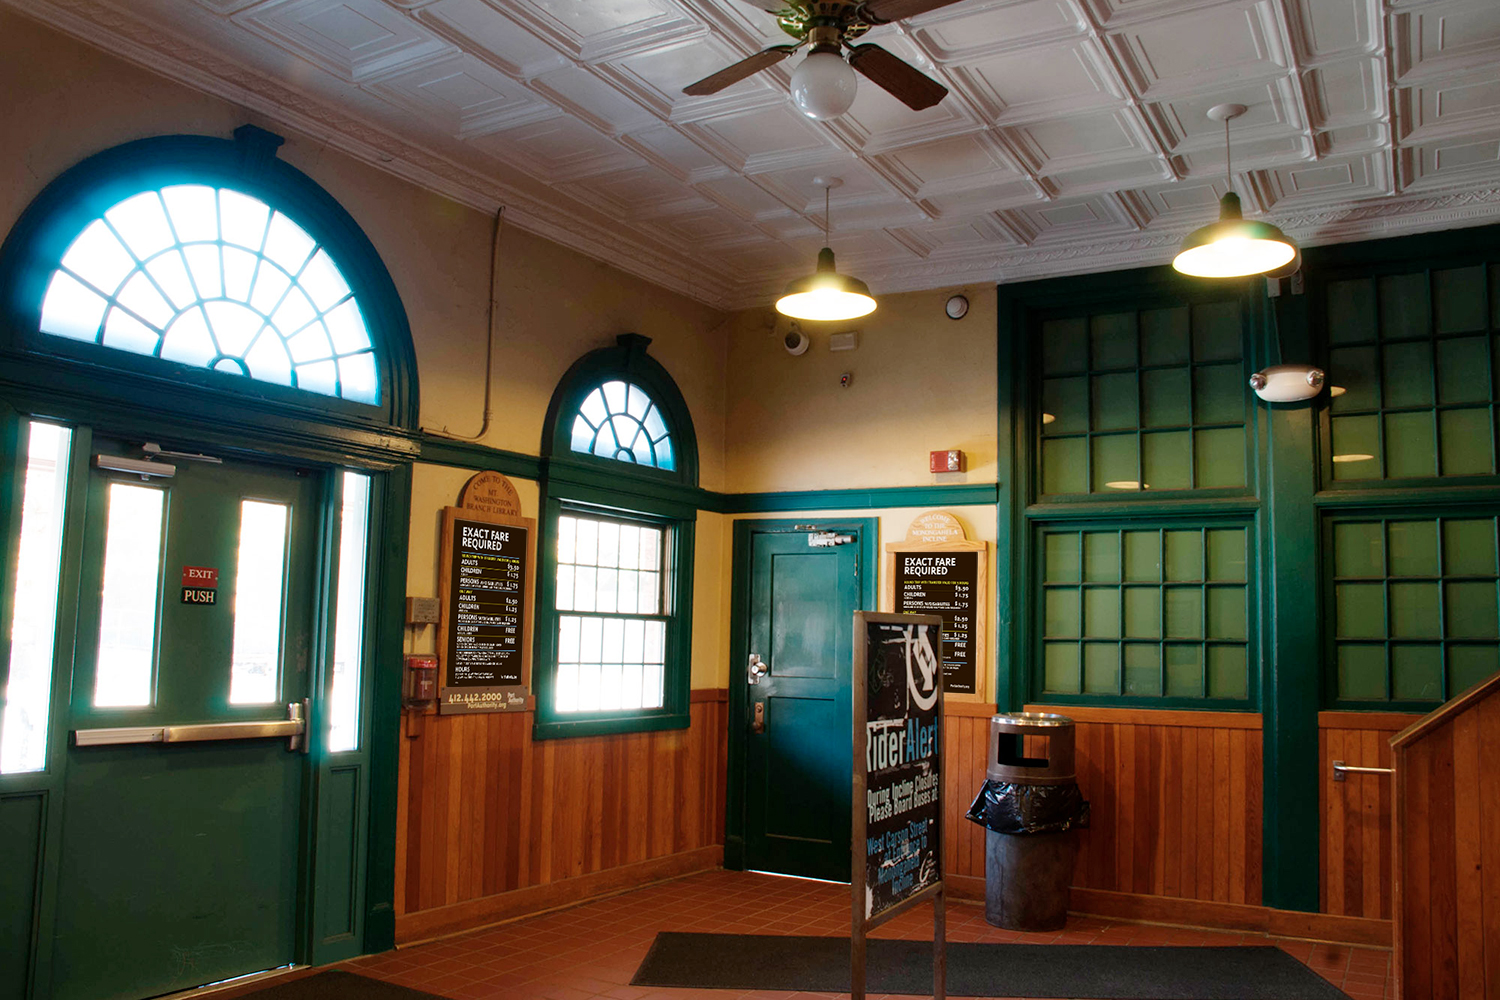 Inside the Lower Station Lobby